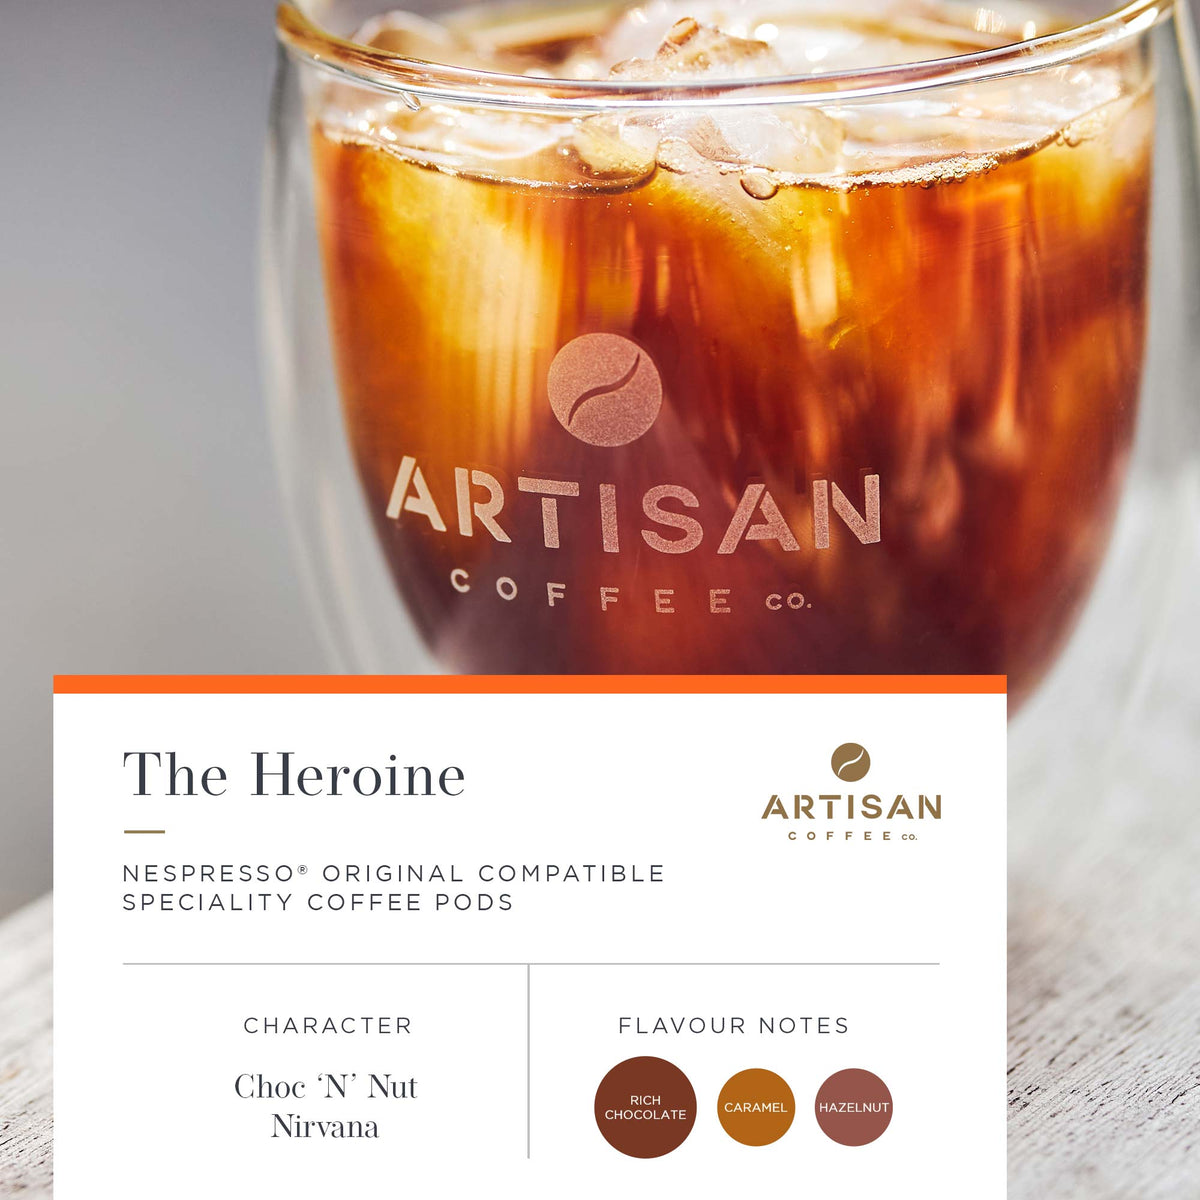 Artisan Coffee Co The Heroine Pods Infographic Flavour Notes